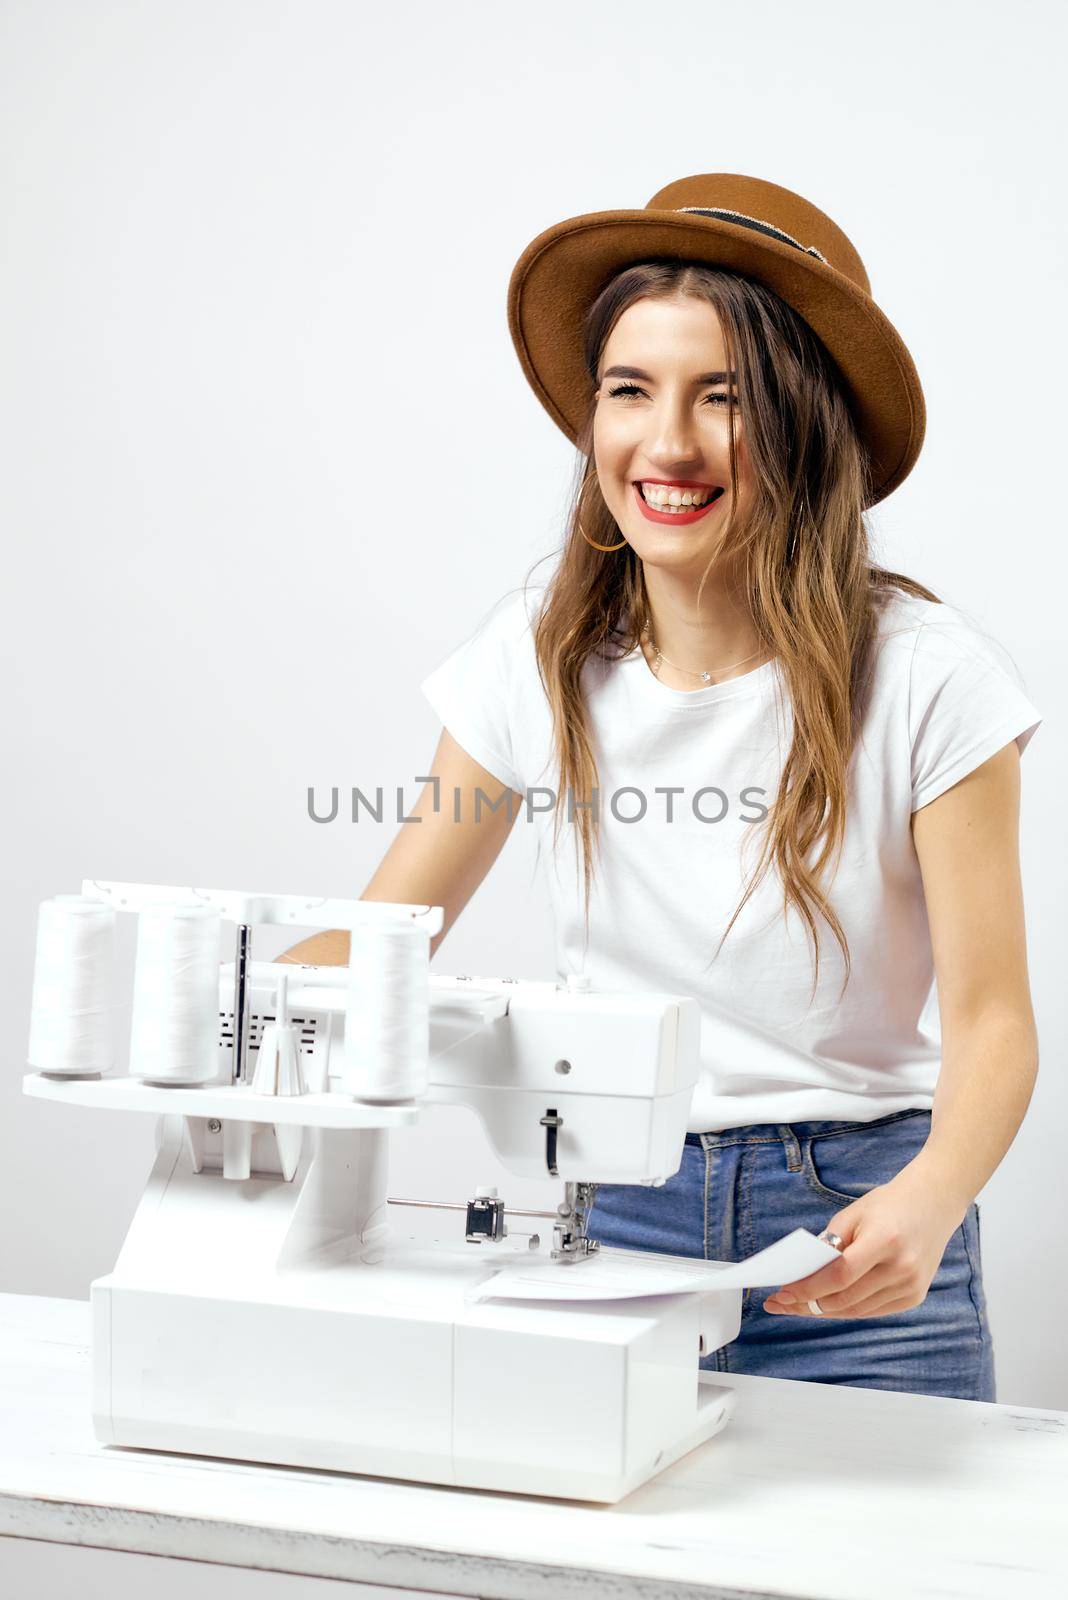 Smiling Girl with sewing machine poses for photo by AntonIlchanka